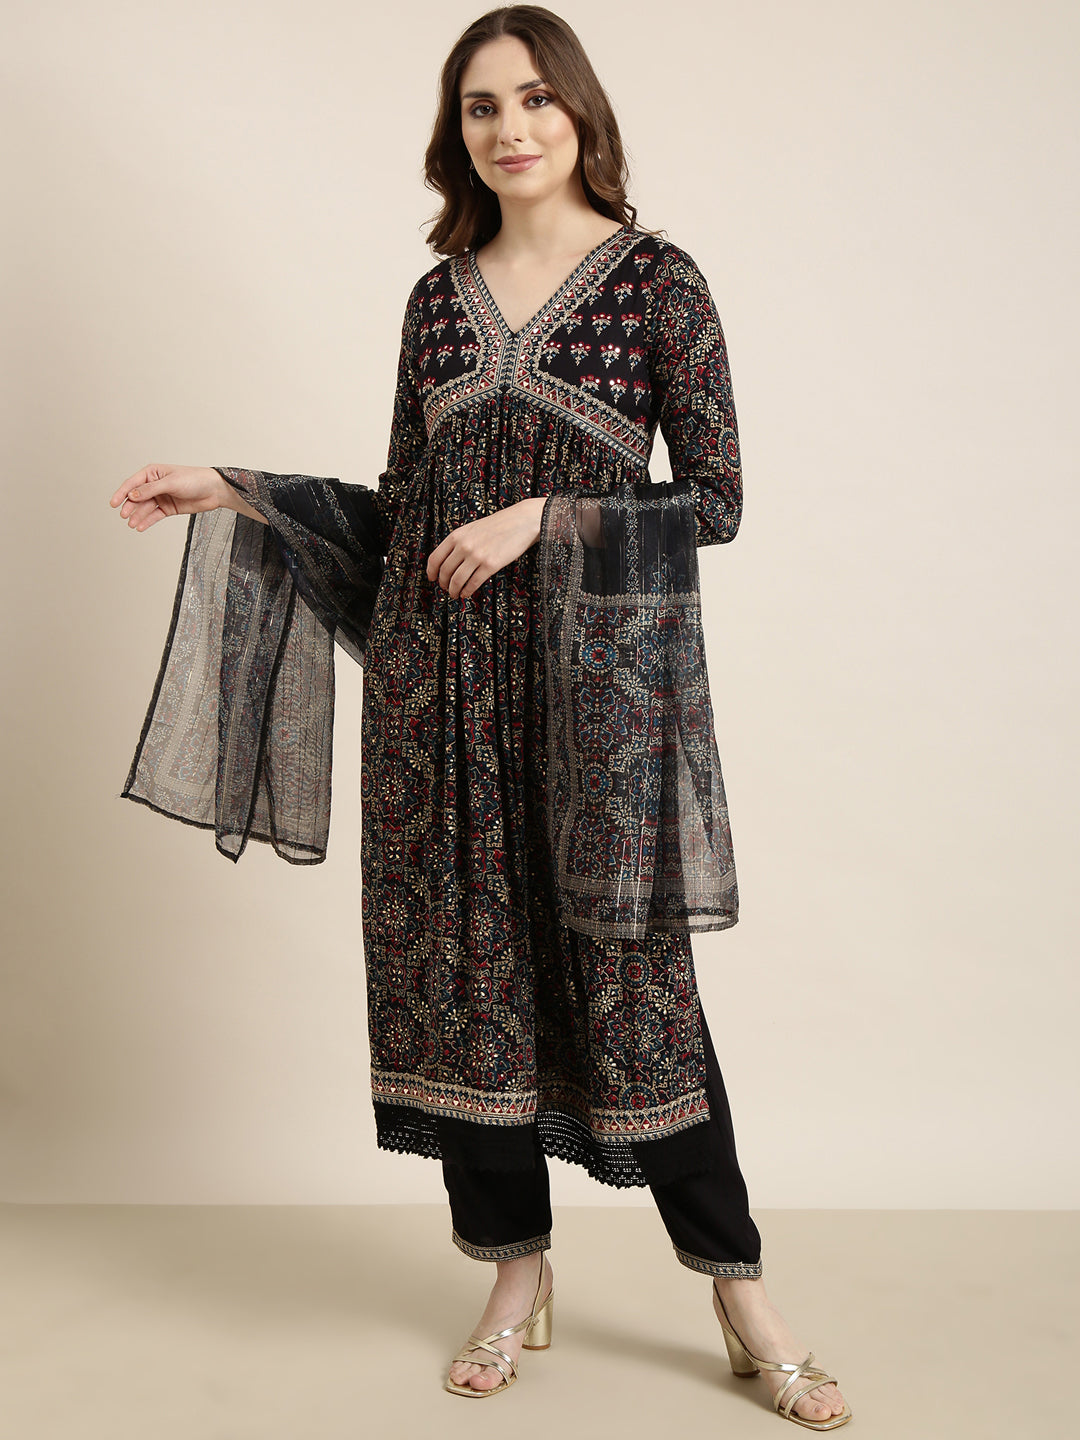 Women A-Line Navy Blue Ethnic Motifs Kurta and Trousers Set Comes With Dupatta